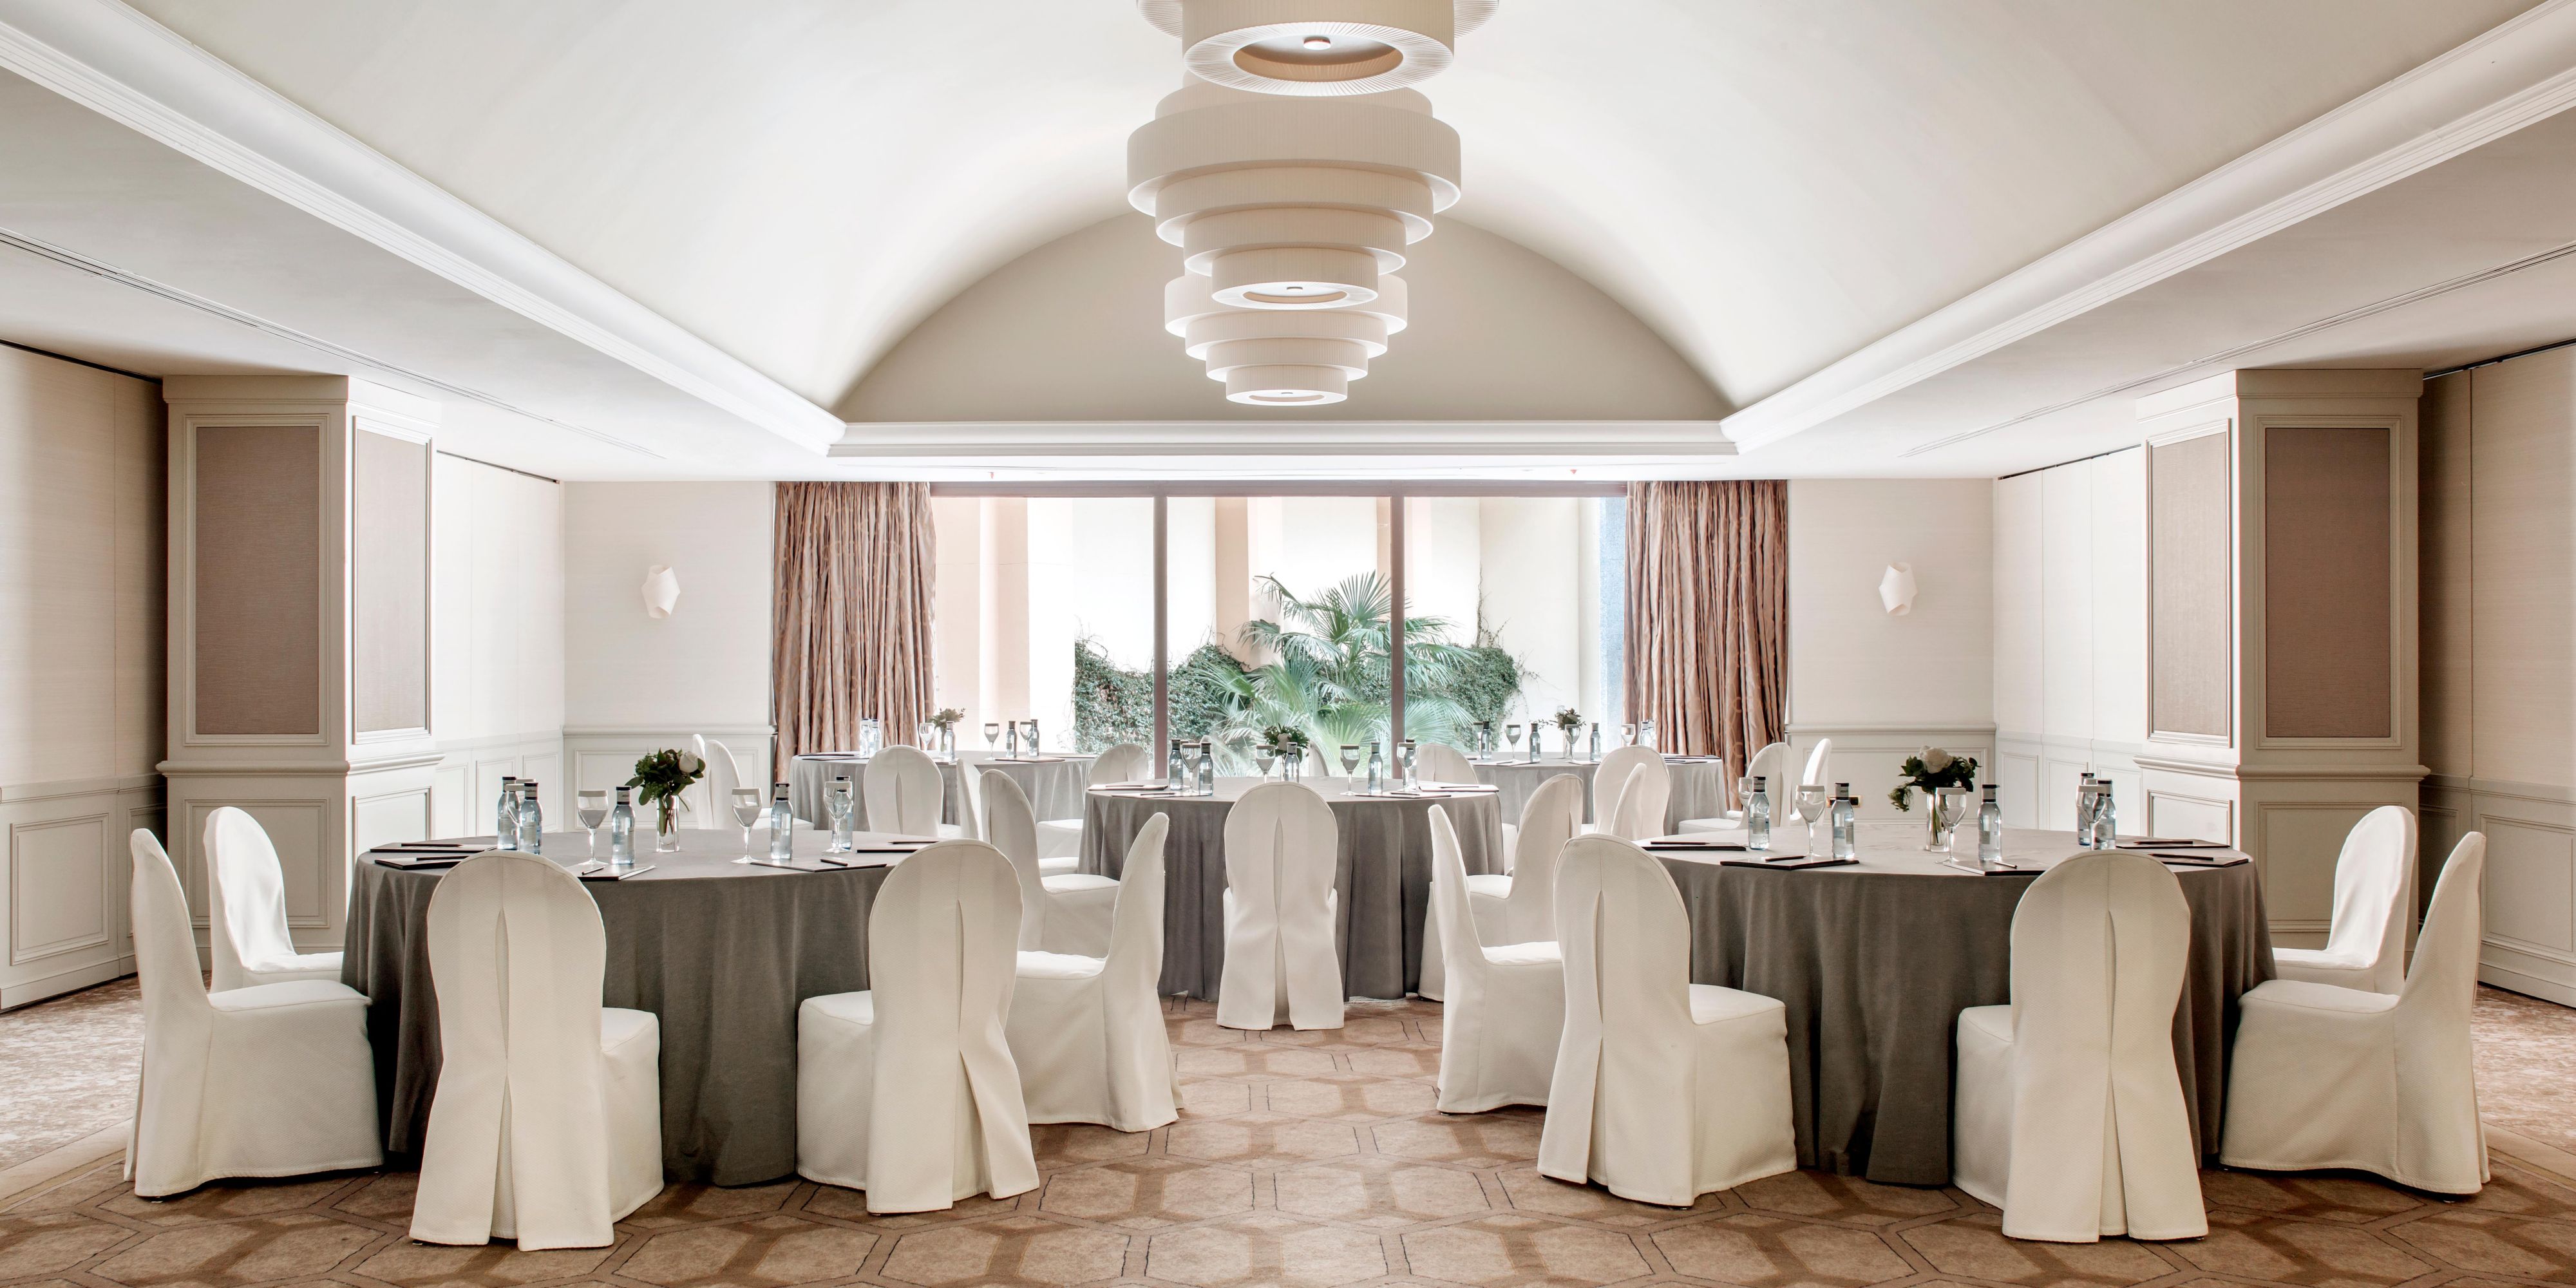 Plan your event at InterContinental Madrid, with almost 70 years of experience in the business, and awarded “Best MICE Hotel in Spain" in 2020 & 2016″, and “Best Business Hotel in Spain" in 2015 and 2014 in the World Travel Awards.